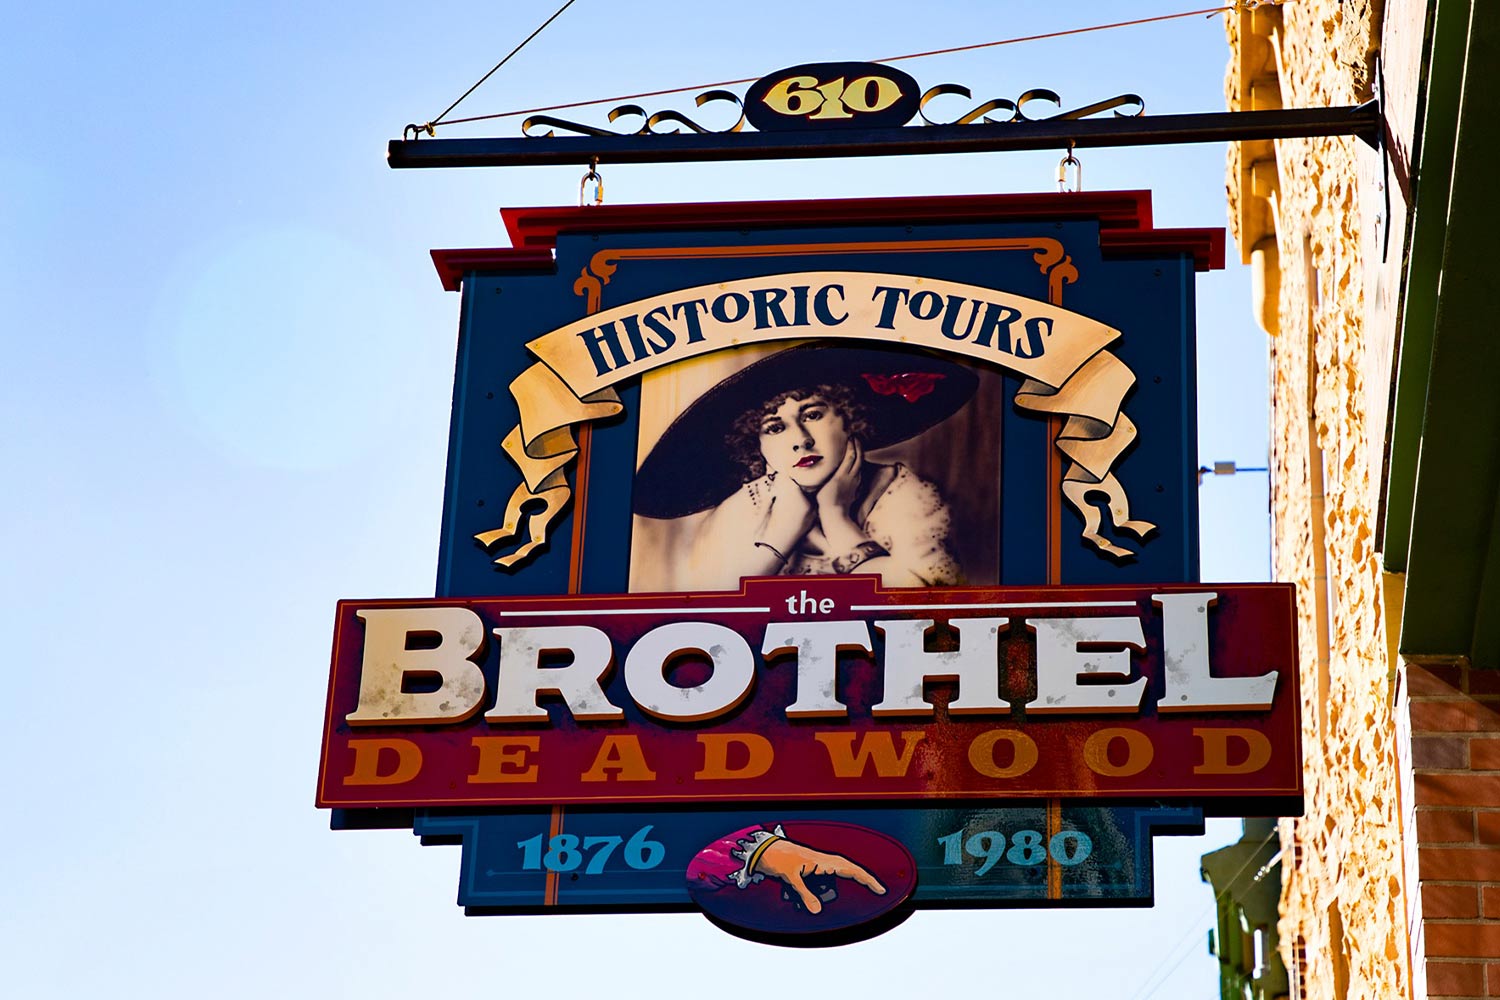 Vintage hanging sign reading, "Historic Tours, The Brothel Deadwood"